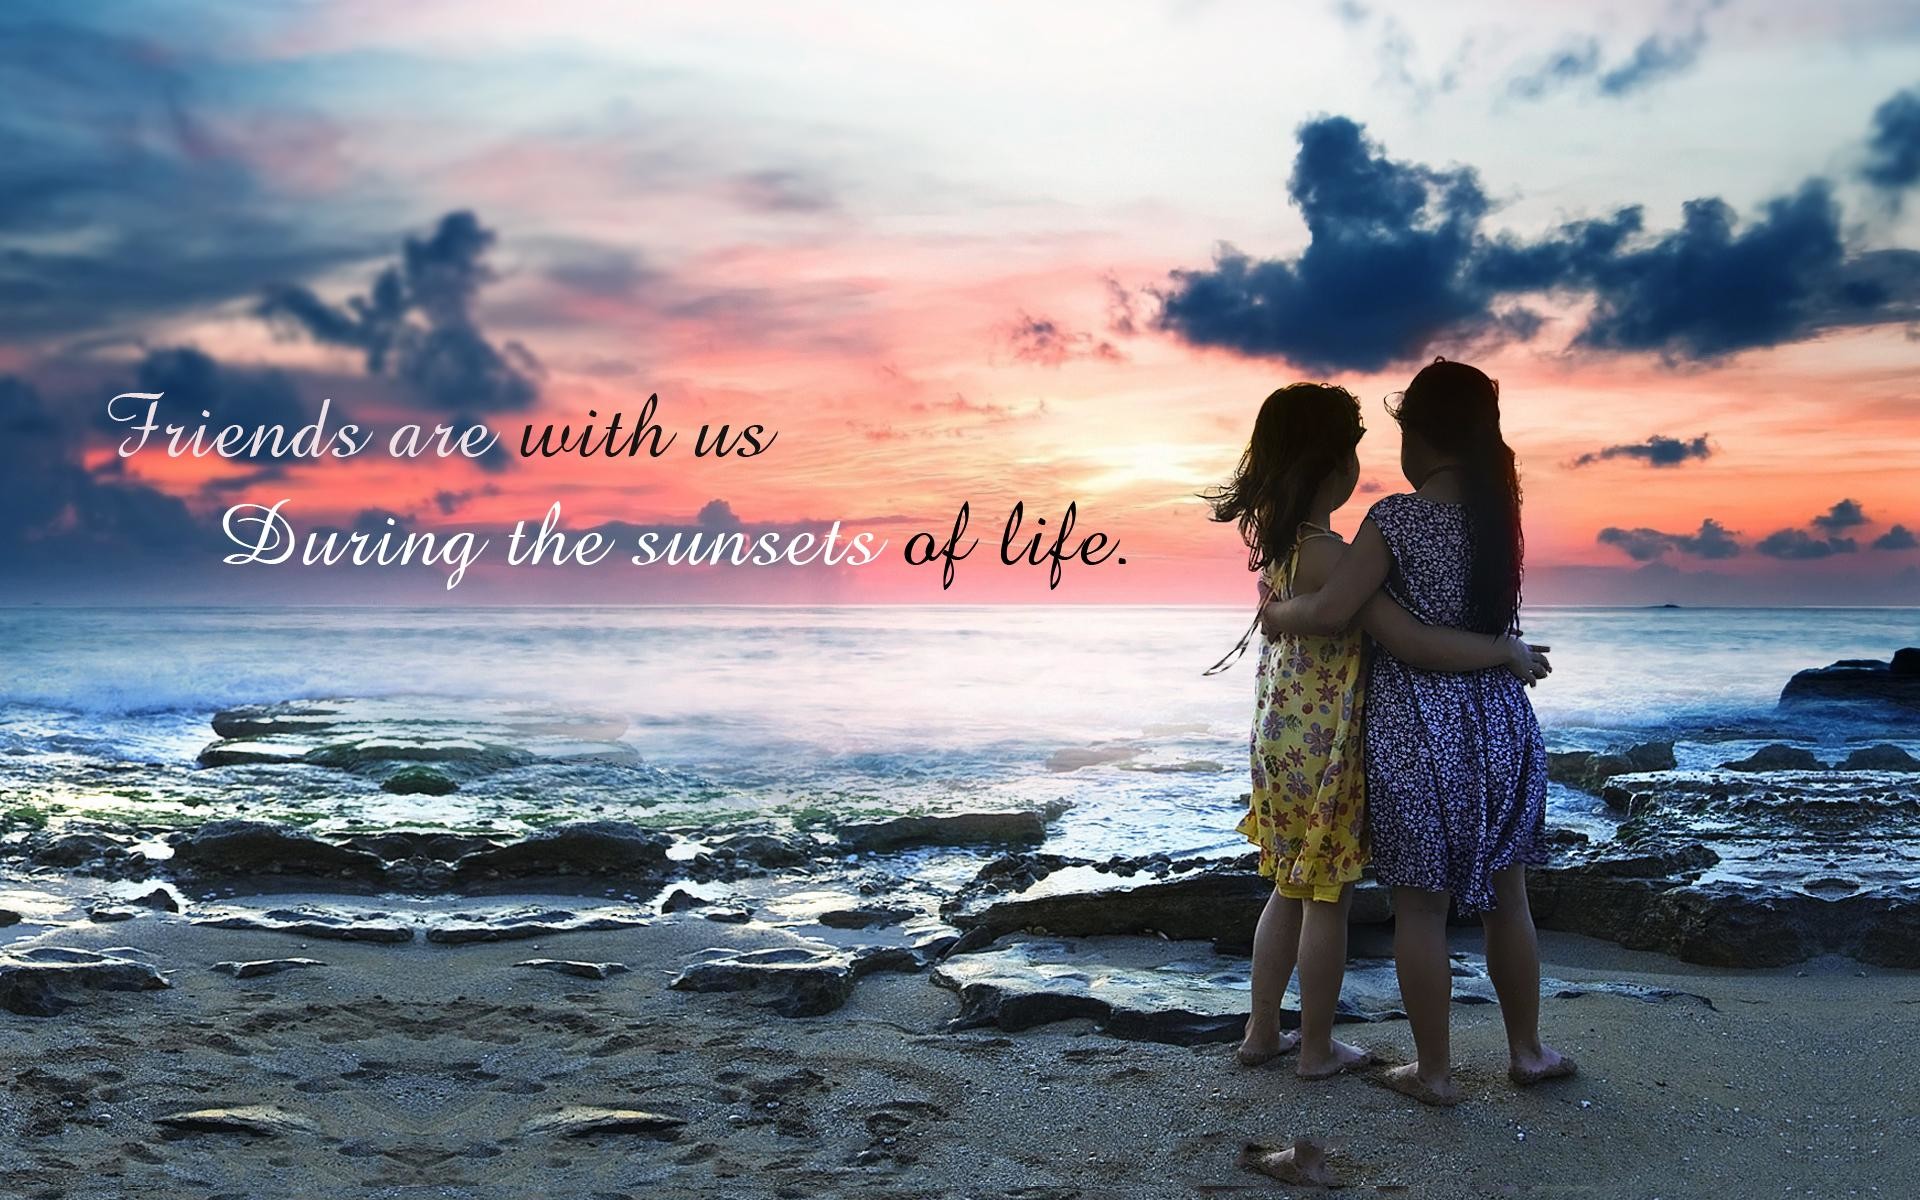 Friendship Quotes Wallpapers - Sunset With Friends Quotes - 1920x1200  Wallpaper 